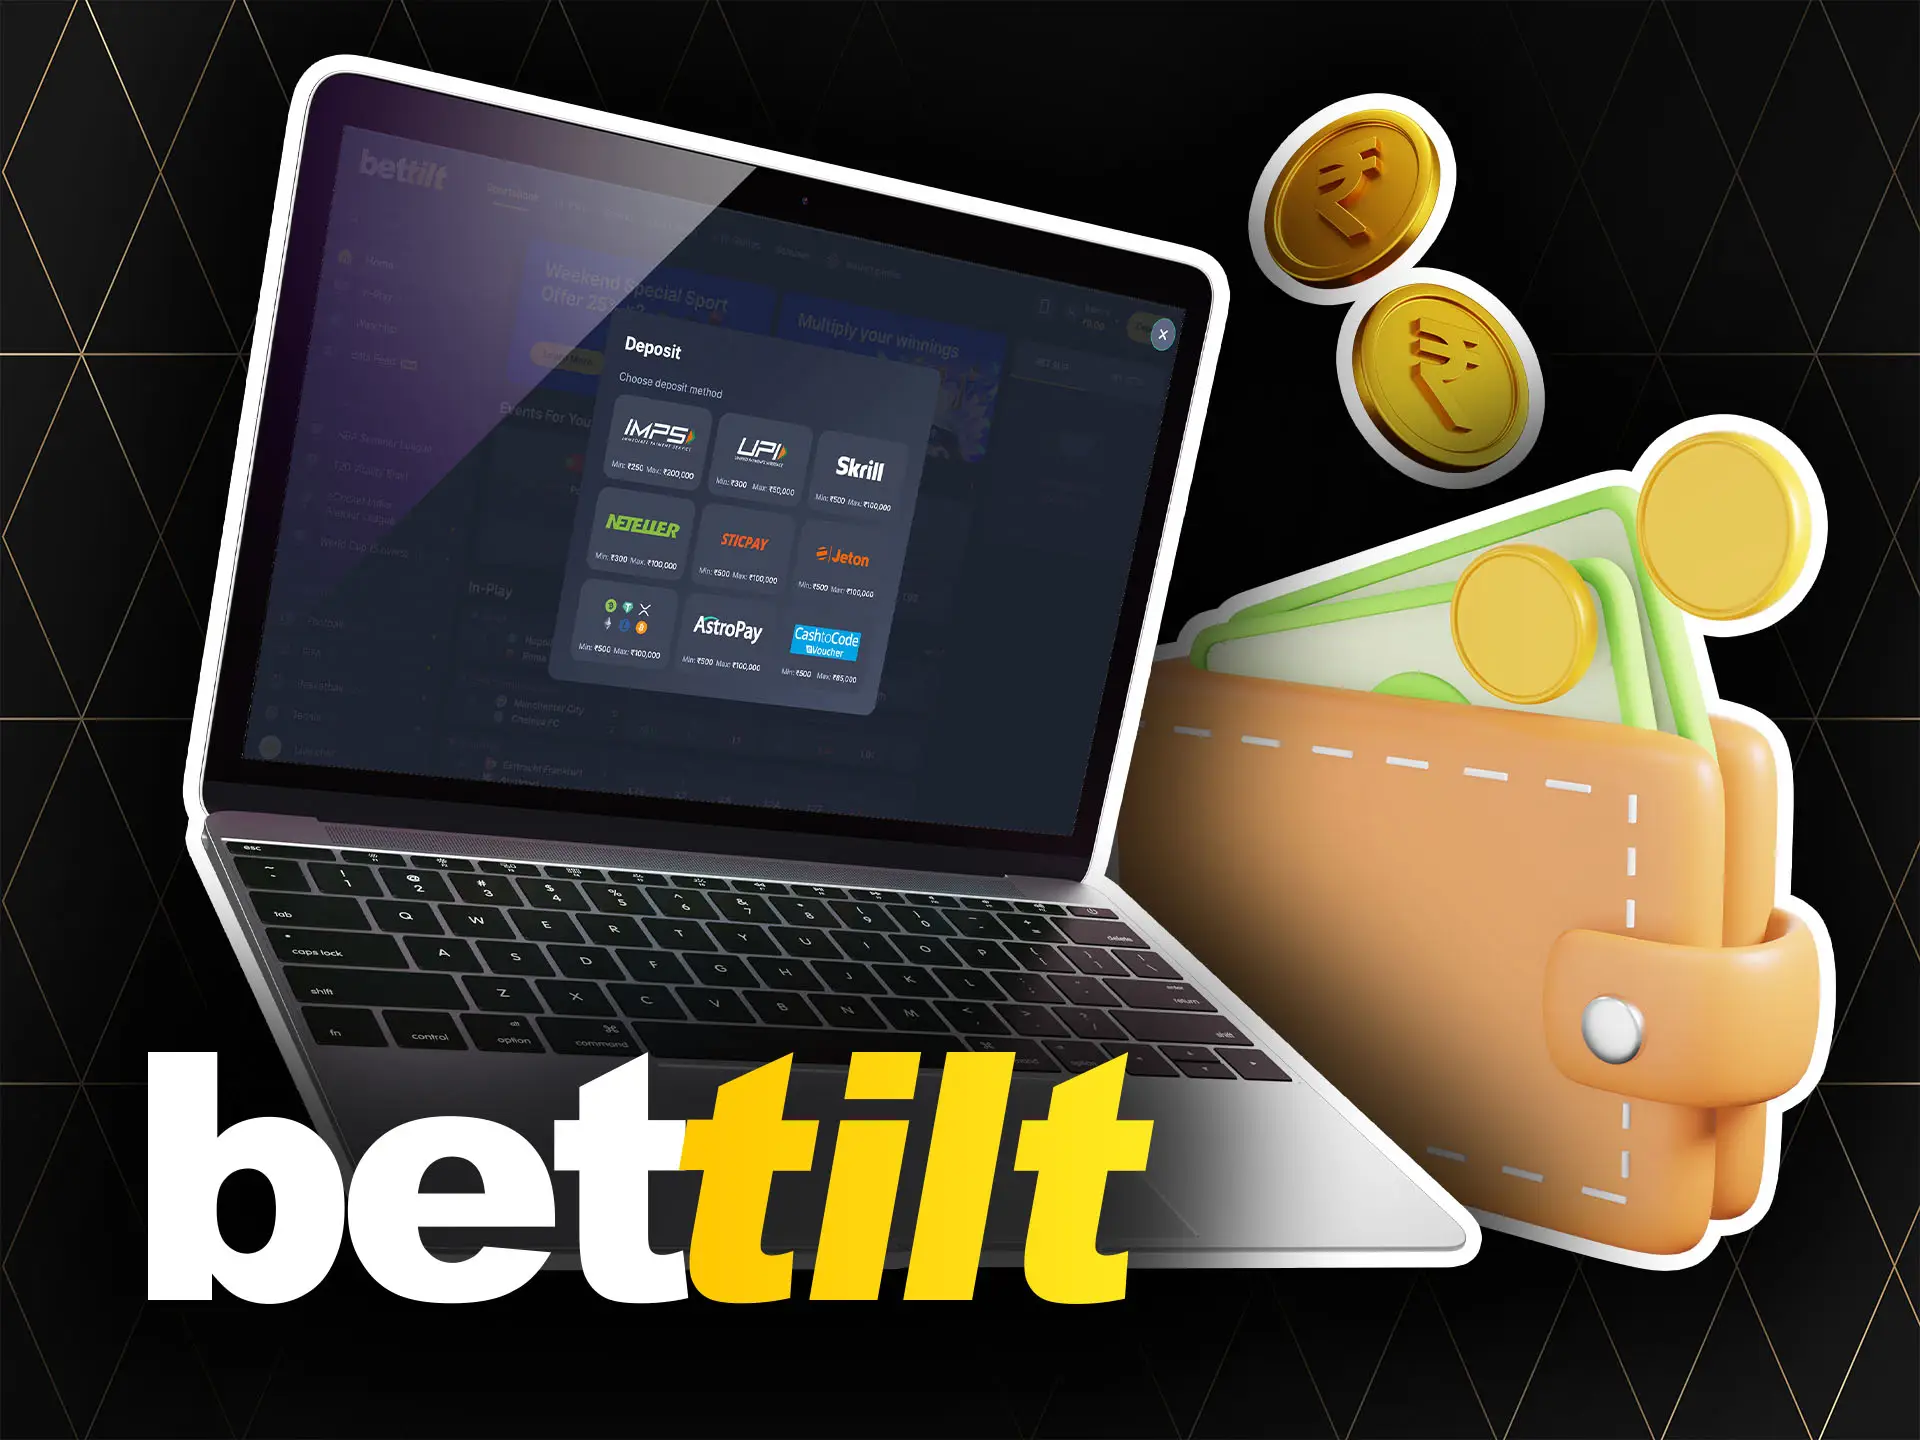 Log in to Bettilt, open the casihier desk and top up your account.